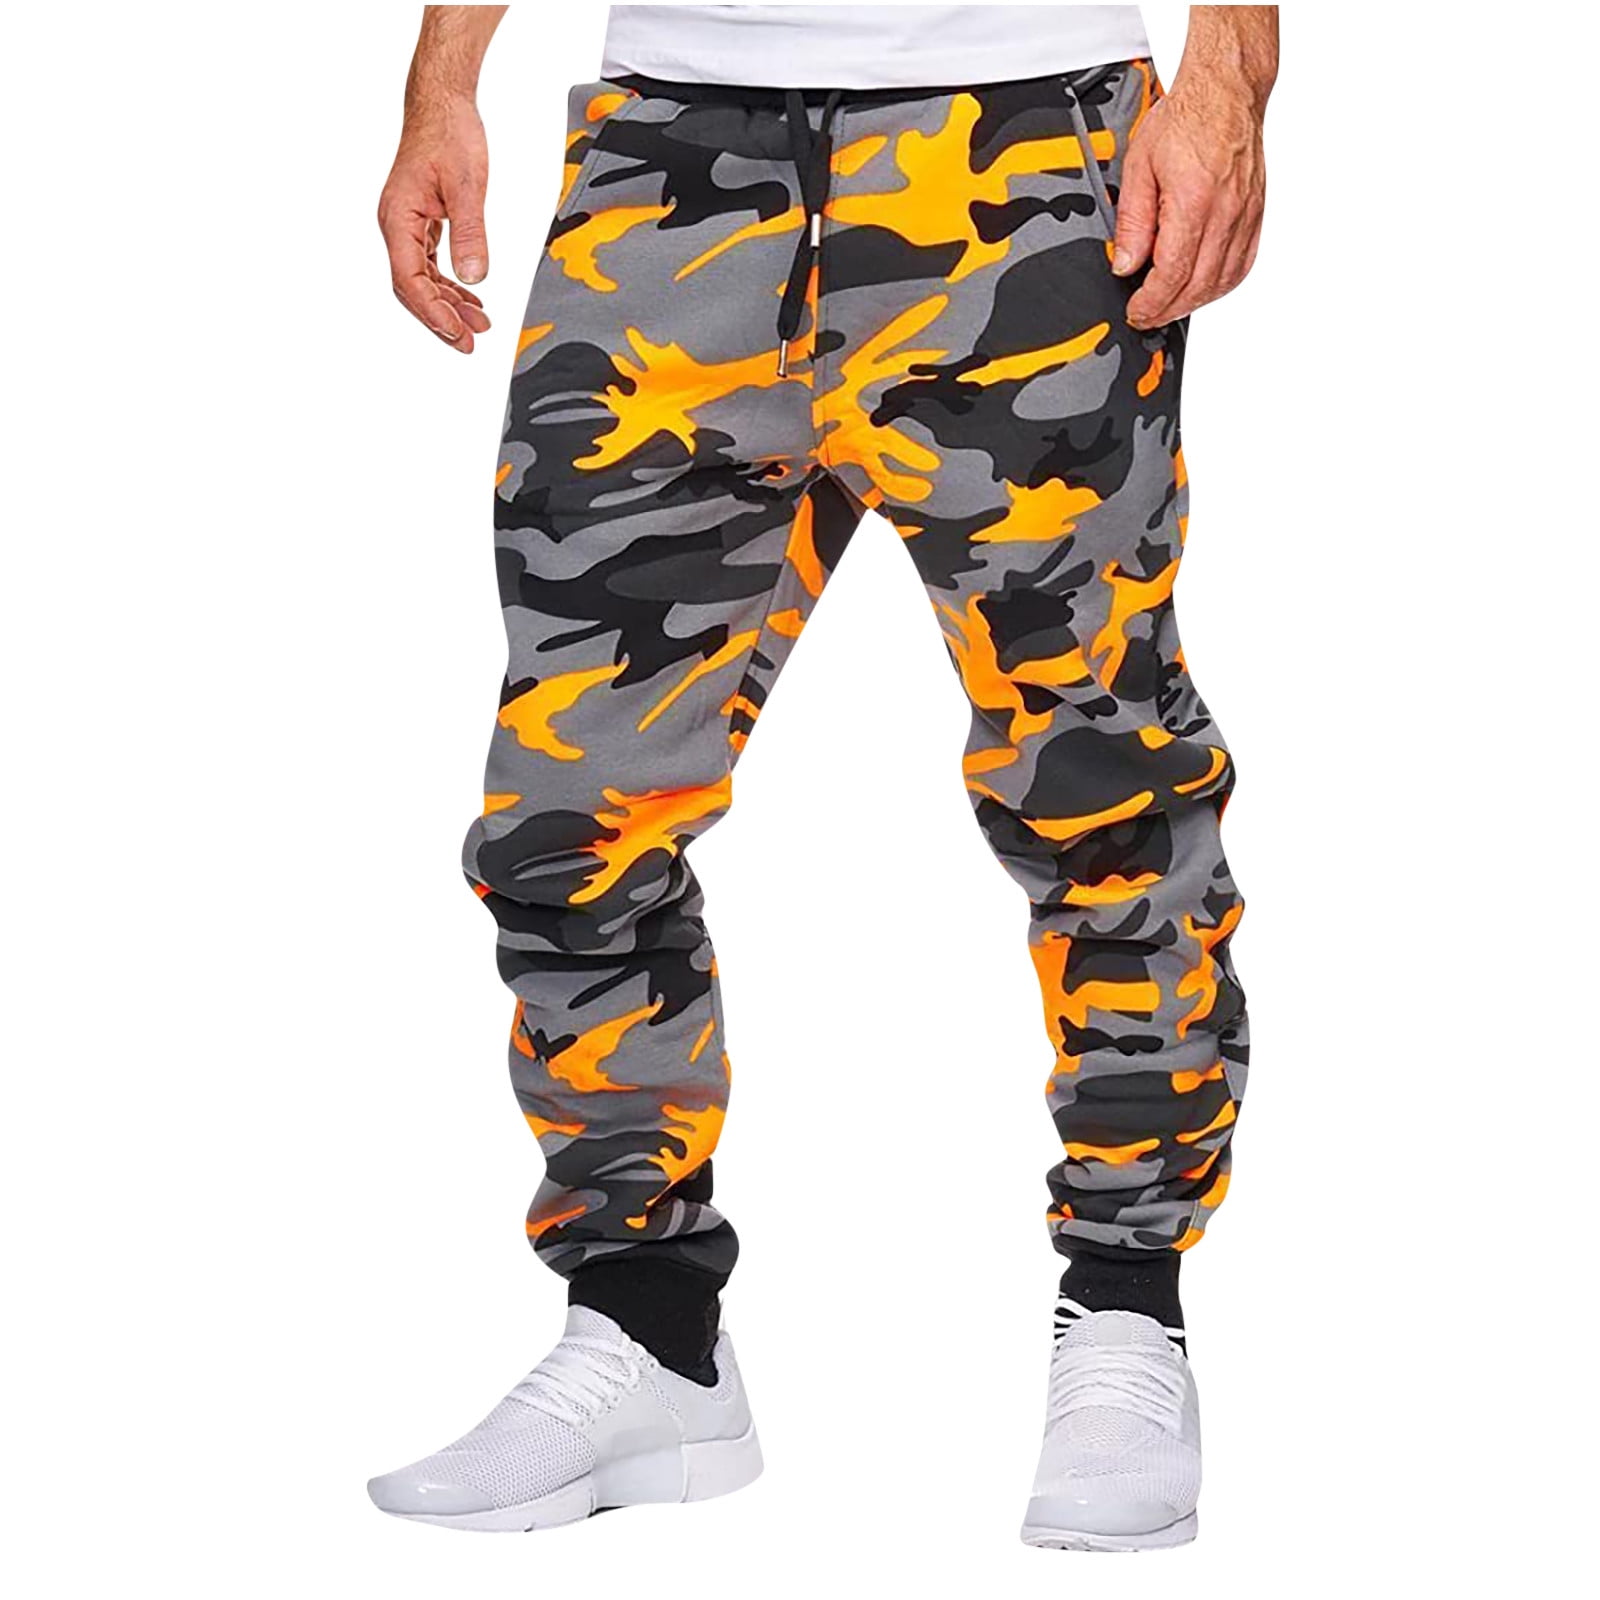 symoid Mens Athletic Sweatpants- Camouflage Tracksuit Bottoms Jogging ...